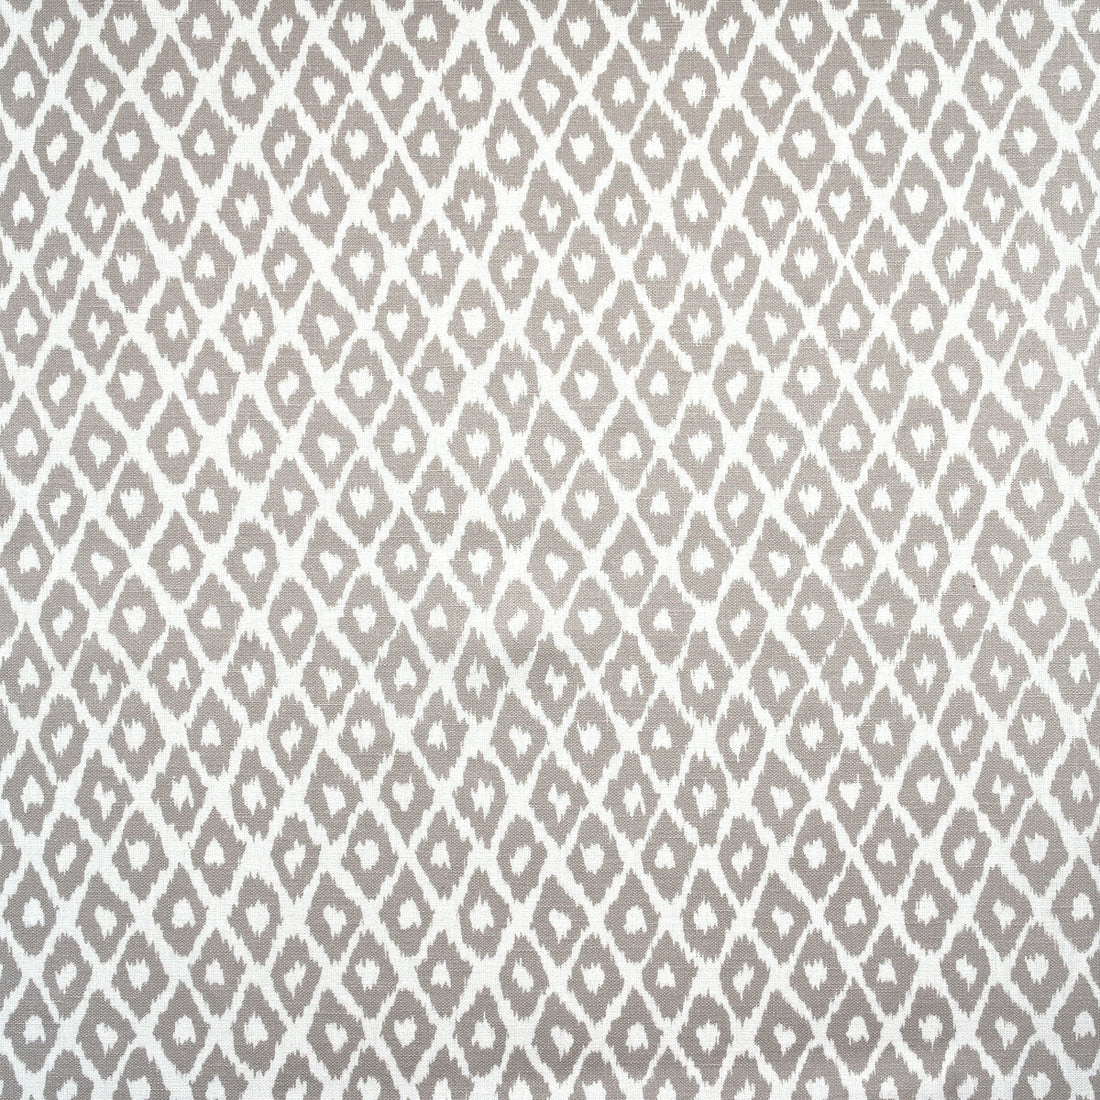 Gypsum Outdoor fabric in cloud color - pattern AM100349.11.0 - by Kravet Couture in the Andrew Martin The Great Outdoors collection